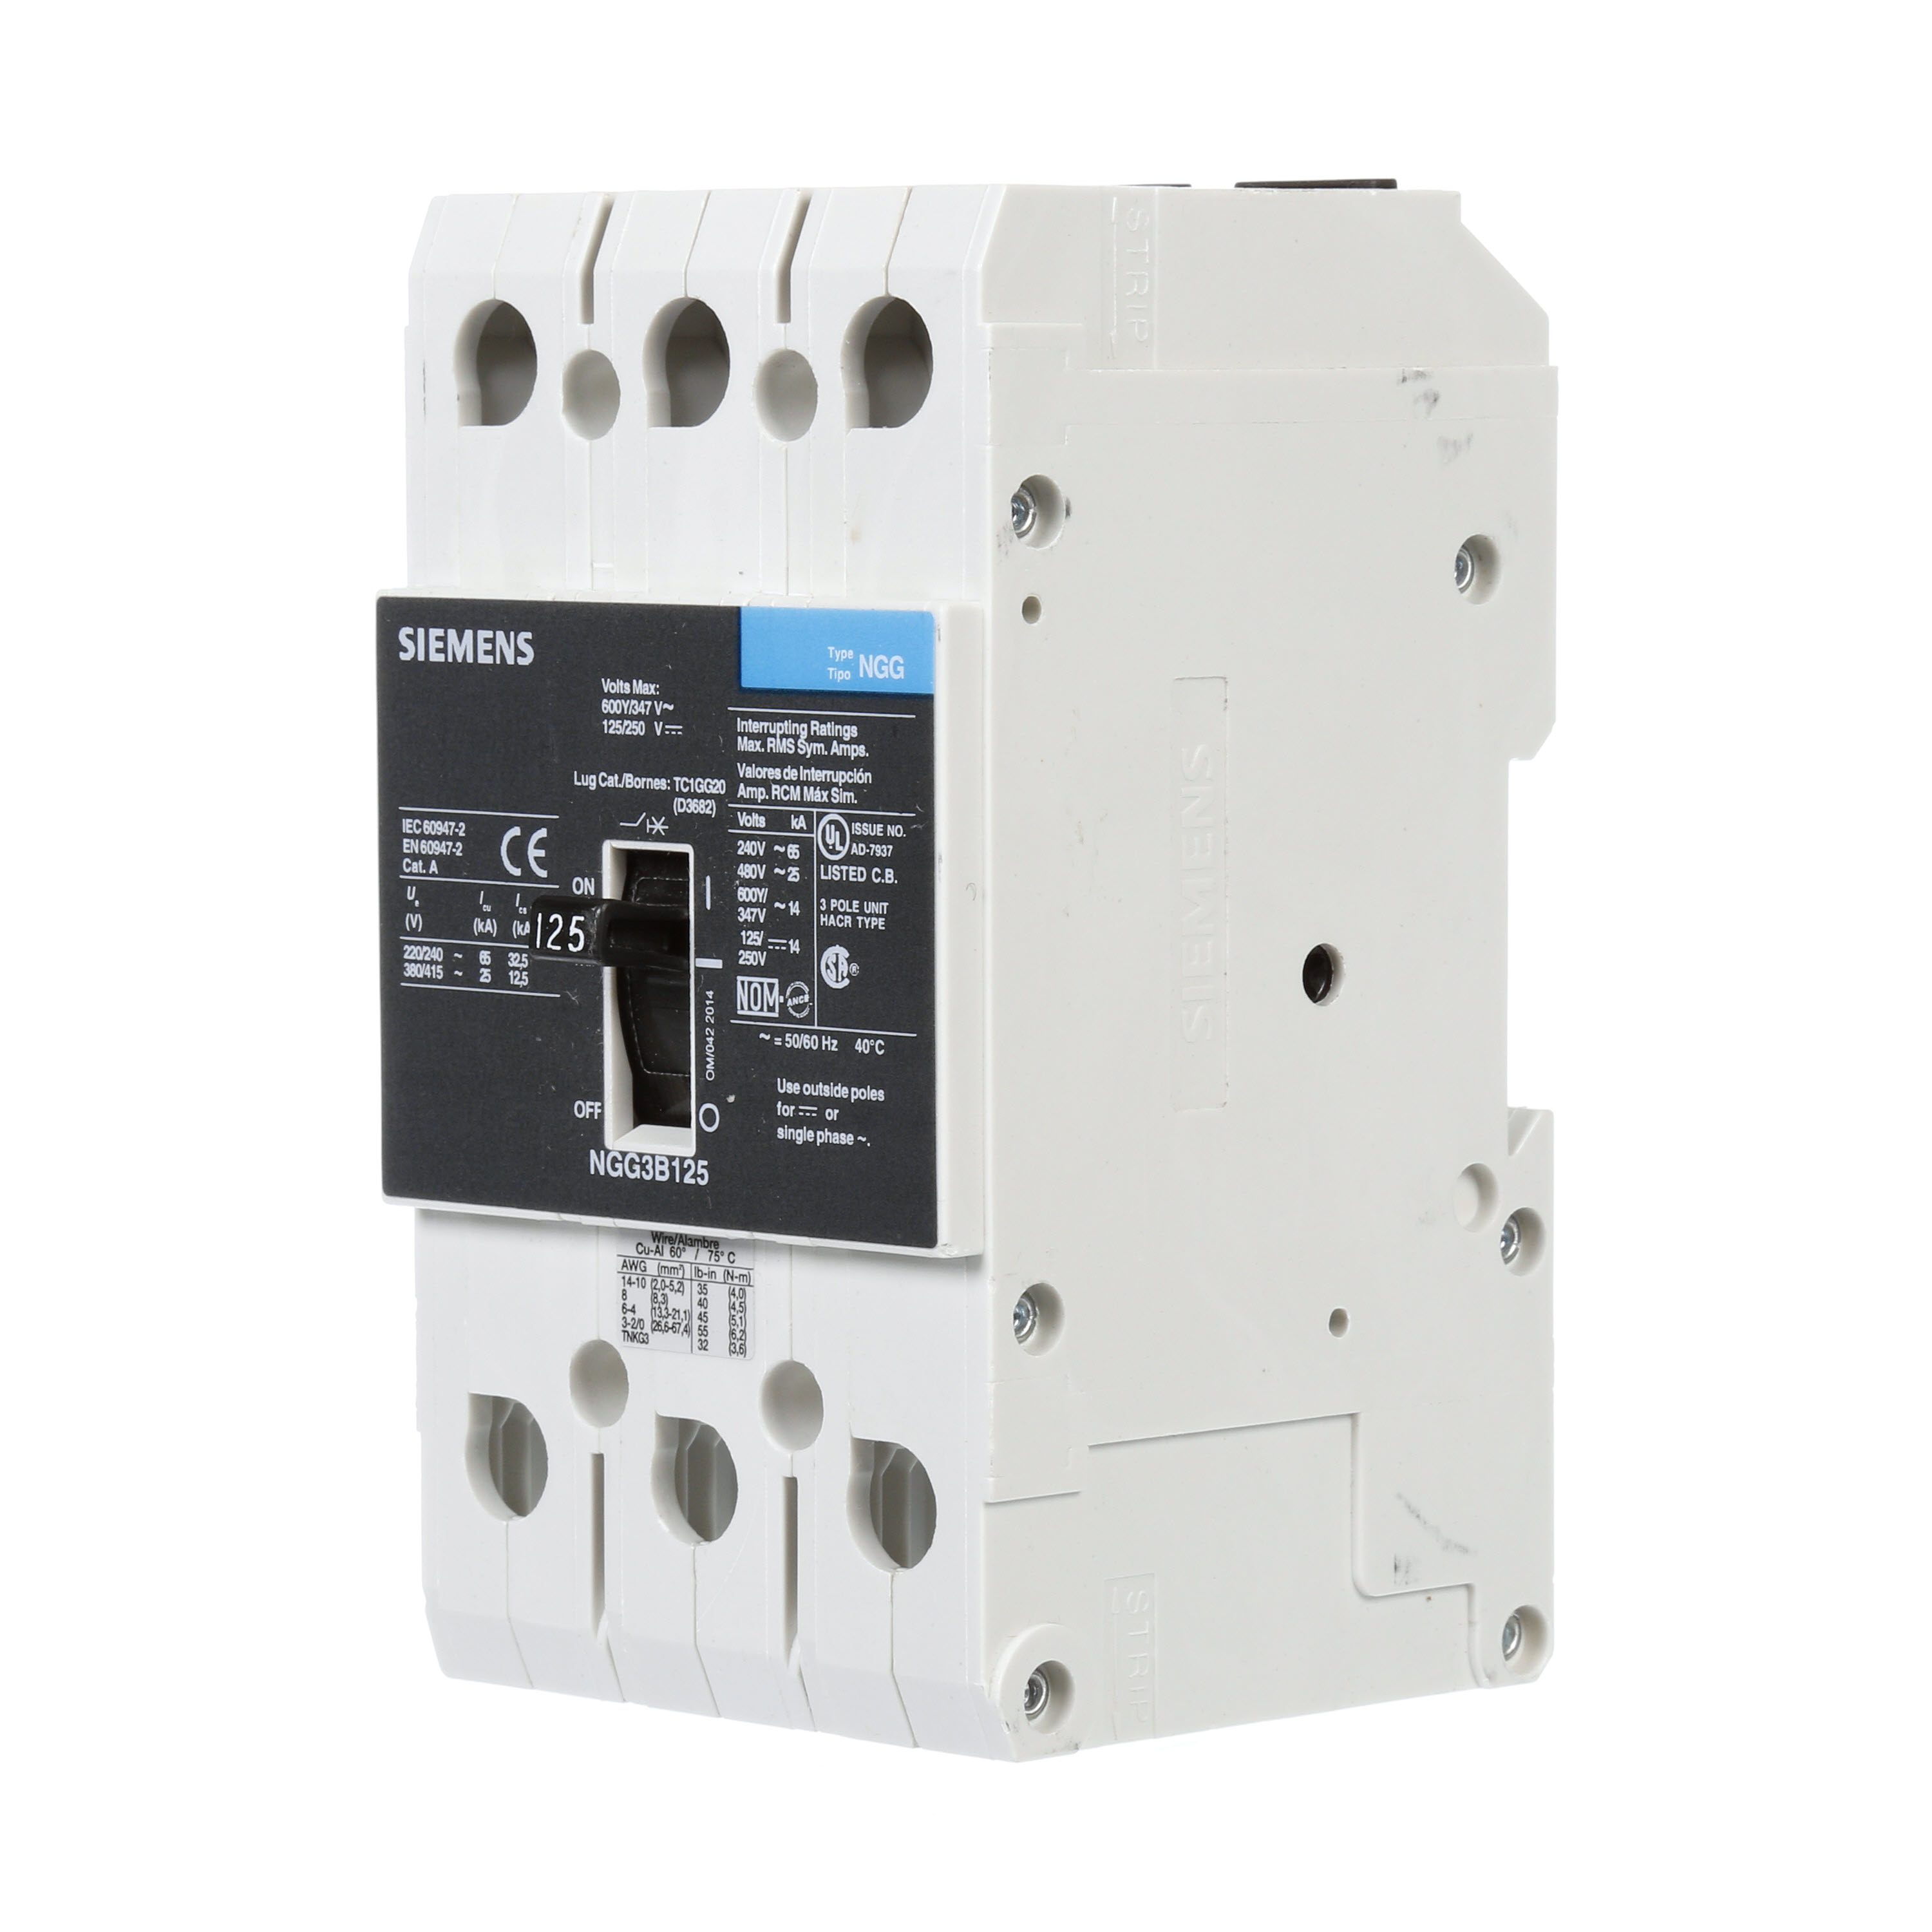 SIEMENS LOW VOLTAGE G FRAME CIRCUIT BREAKER WITH THERMAL - MAGNETIC TRIP. UL LISTED NGG FRAME WITH STANDARD BREAKING CAPACITY. 125A 3-POLE (14KAIC AT 600Y/347V) (25KAIC AT 480V). SPECIAL FEATURES MOUNTS ON DIN RAIL / SCREW, LINE AND LOAD SIDE LUGS (TC1GG20) WIRE RANGE 8 - 1/0 AWS (CU/AL). DIMENSIONS (W x H x D) IN 3 x5.4 x 2.8.